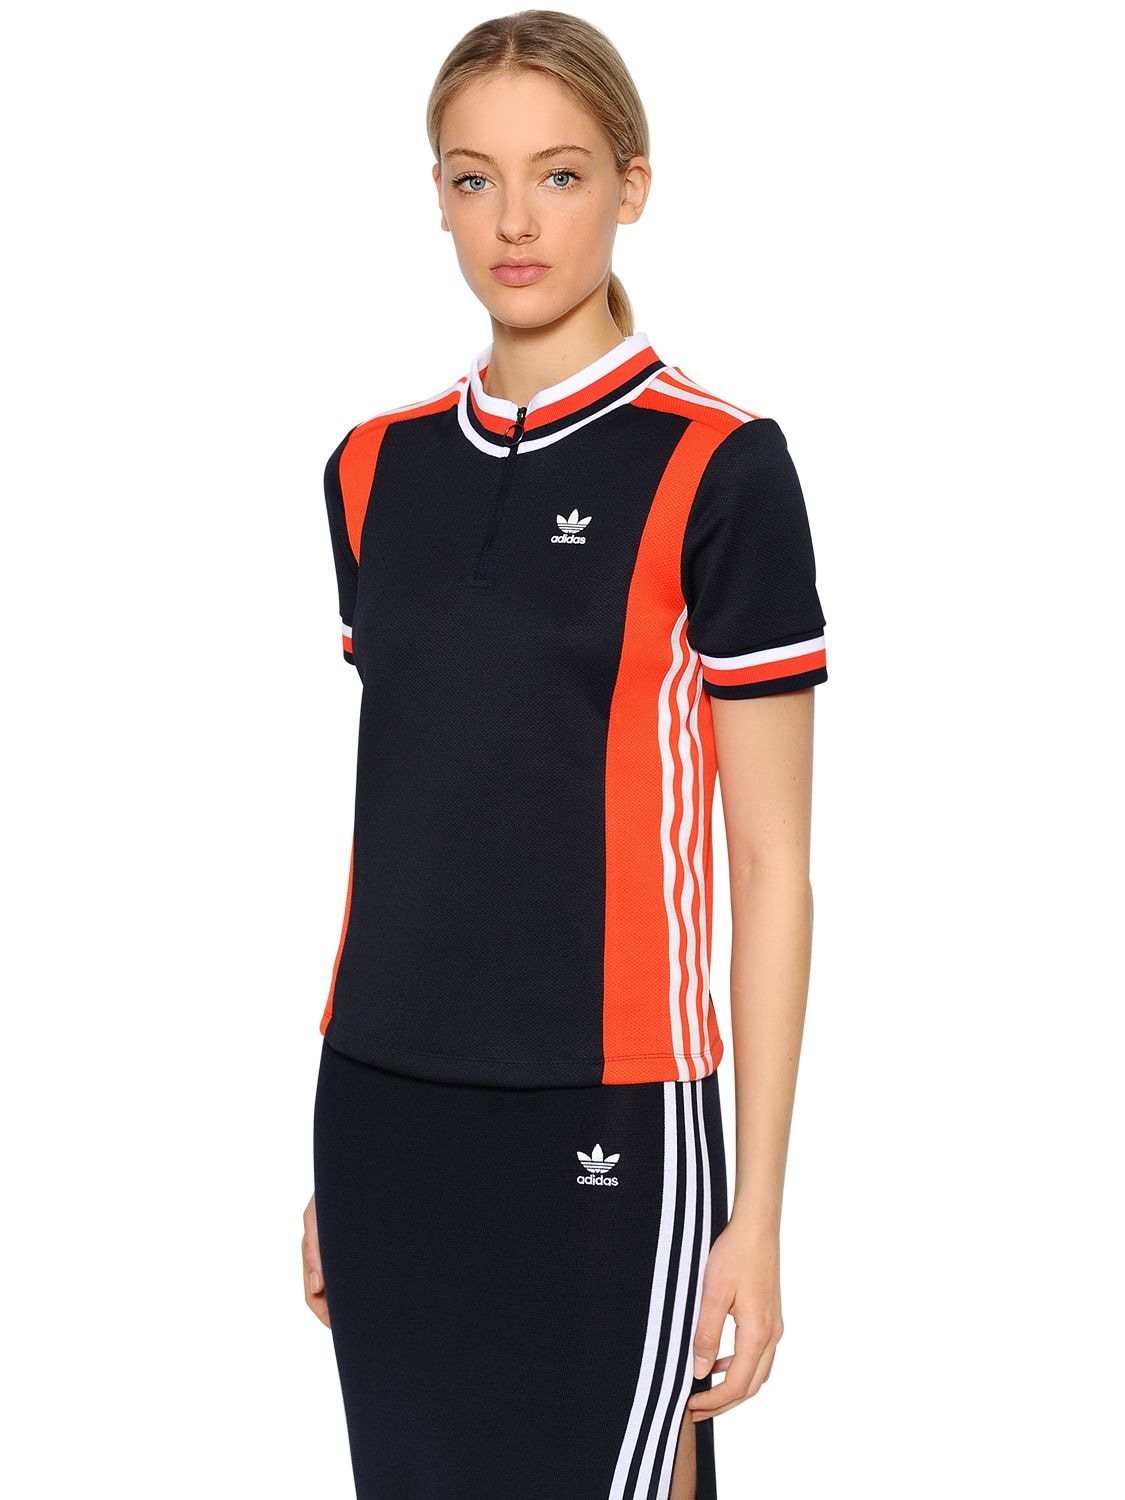 Buy Osaka Archive Jersey T Shirt For Womens At Goxip